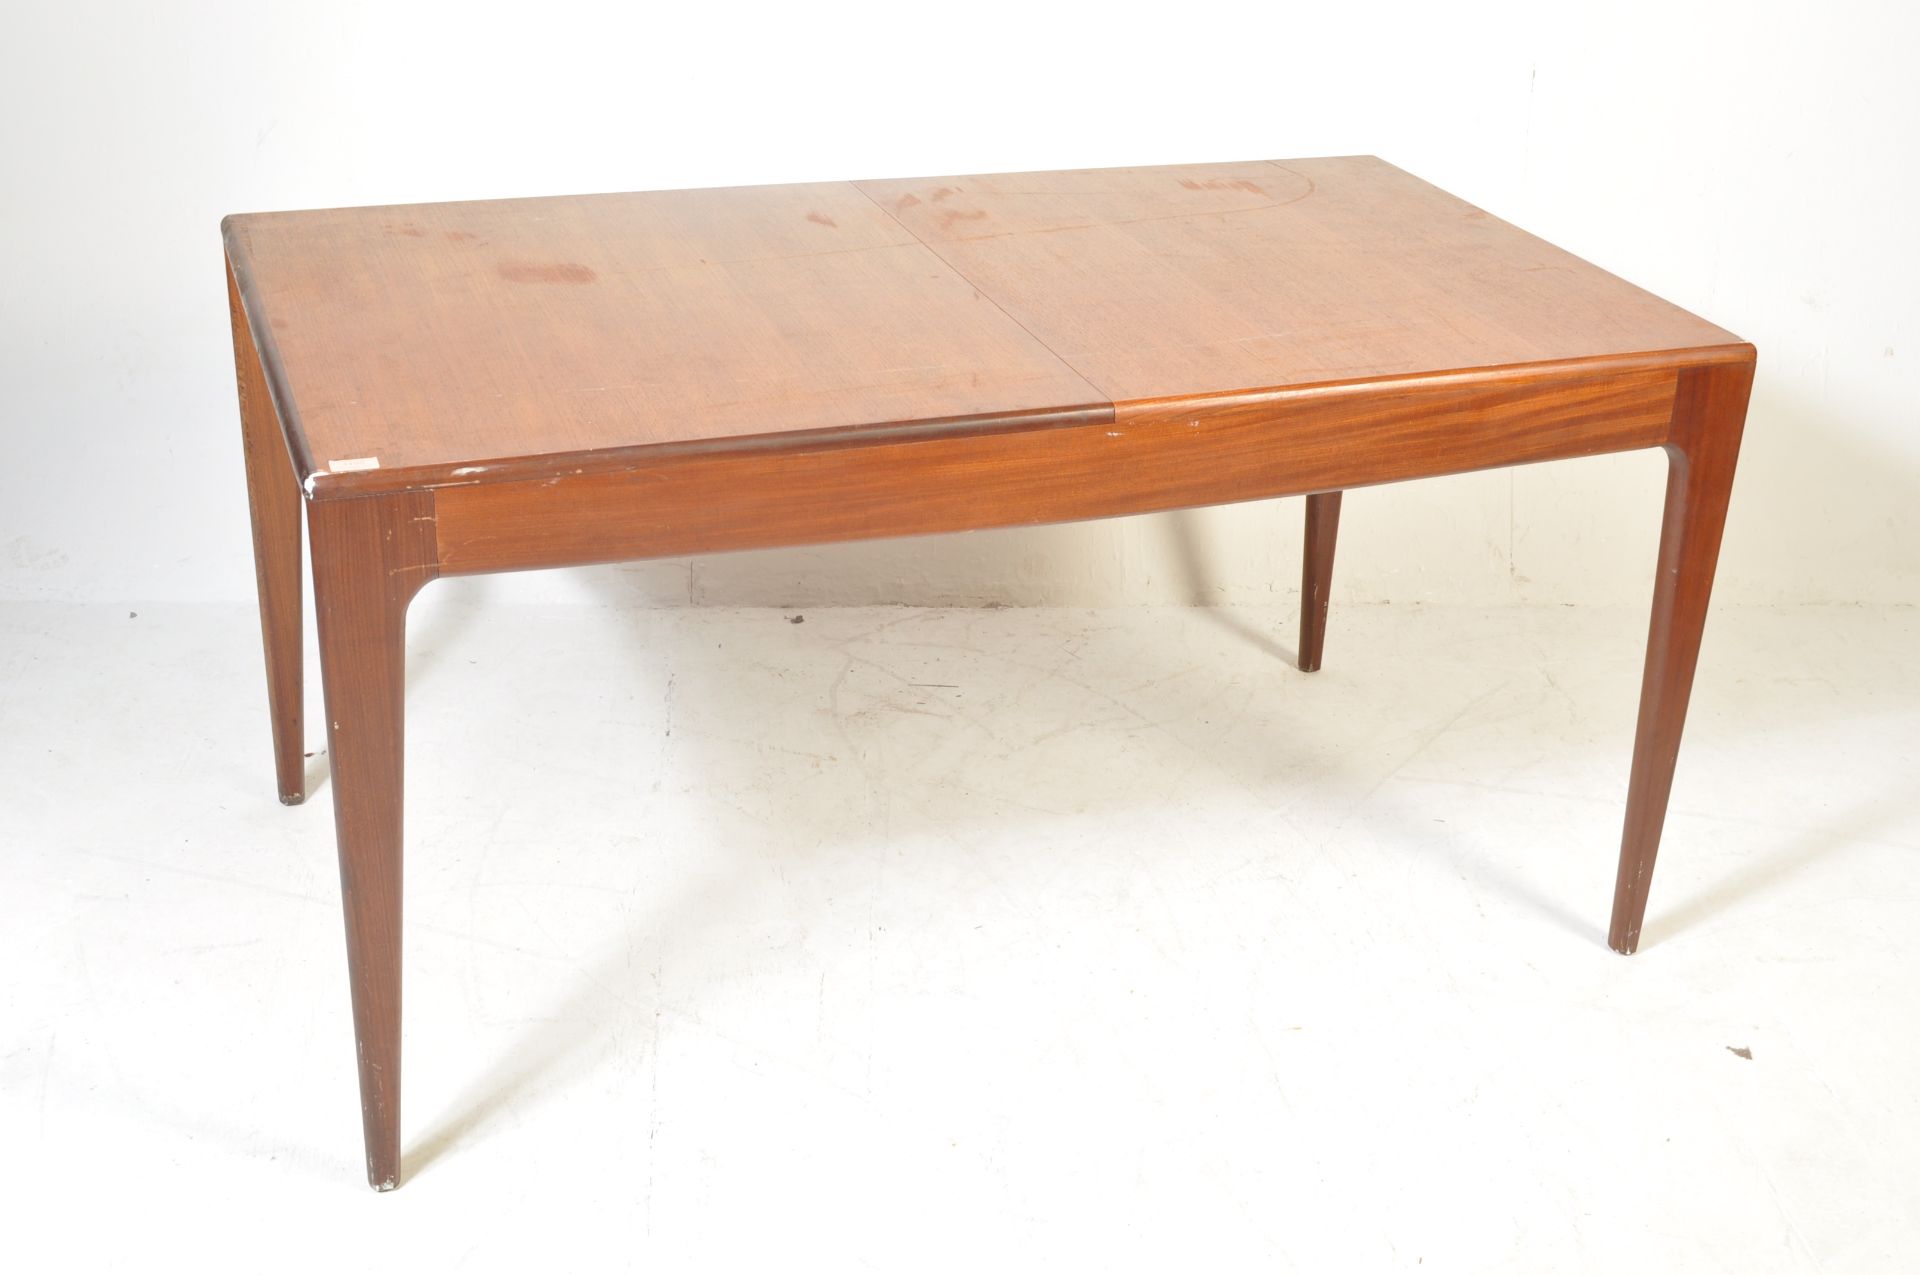 MID 20TH CENTURY TEAK WOOD EXTENDING DING TABLE - Image 2 of 7